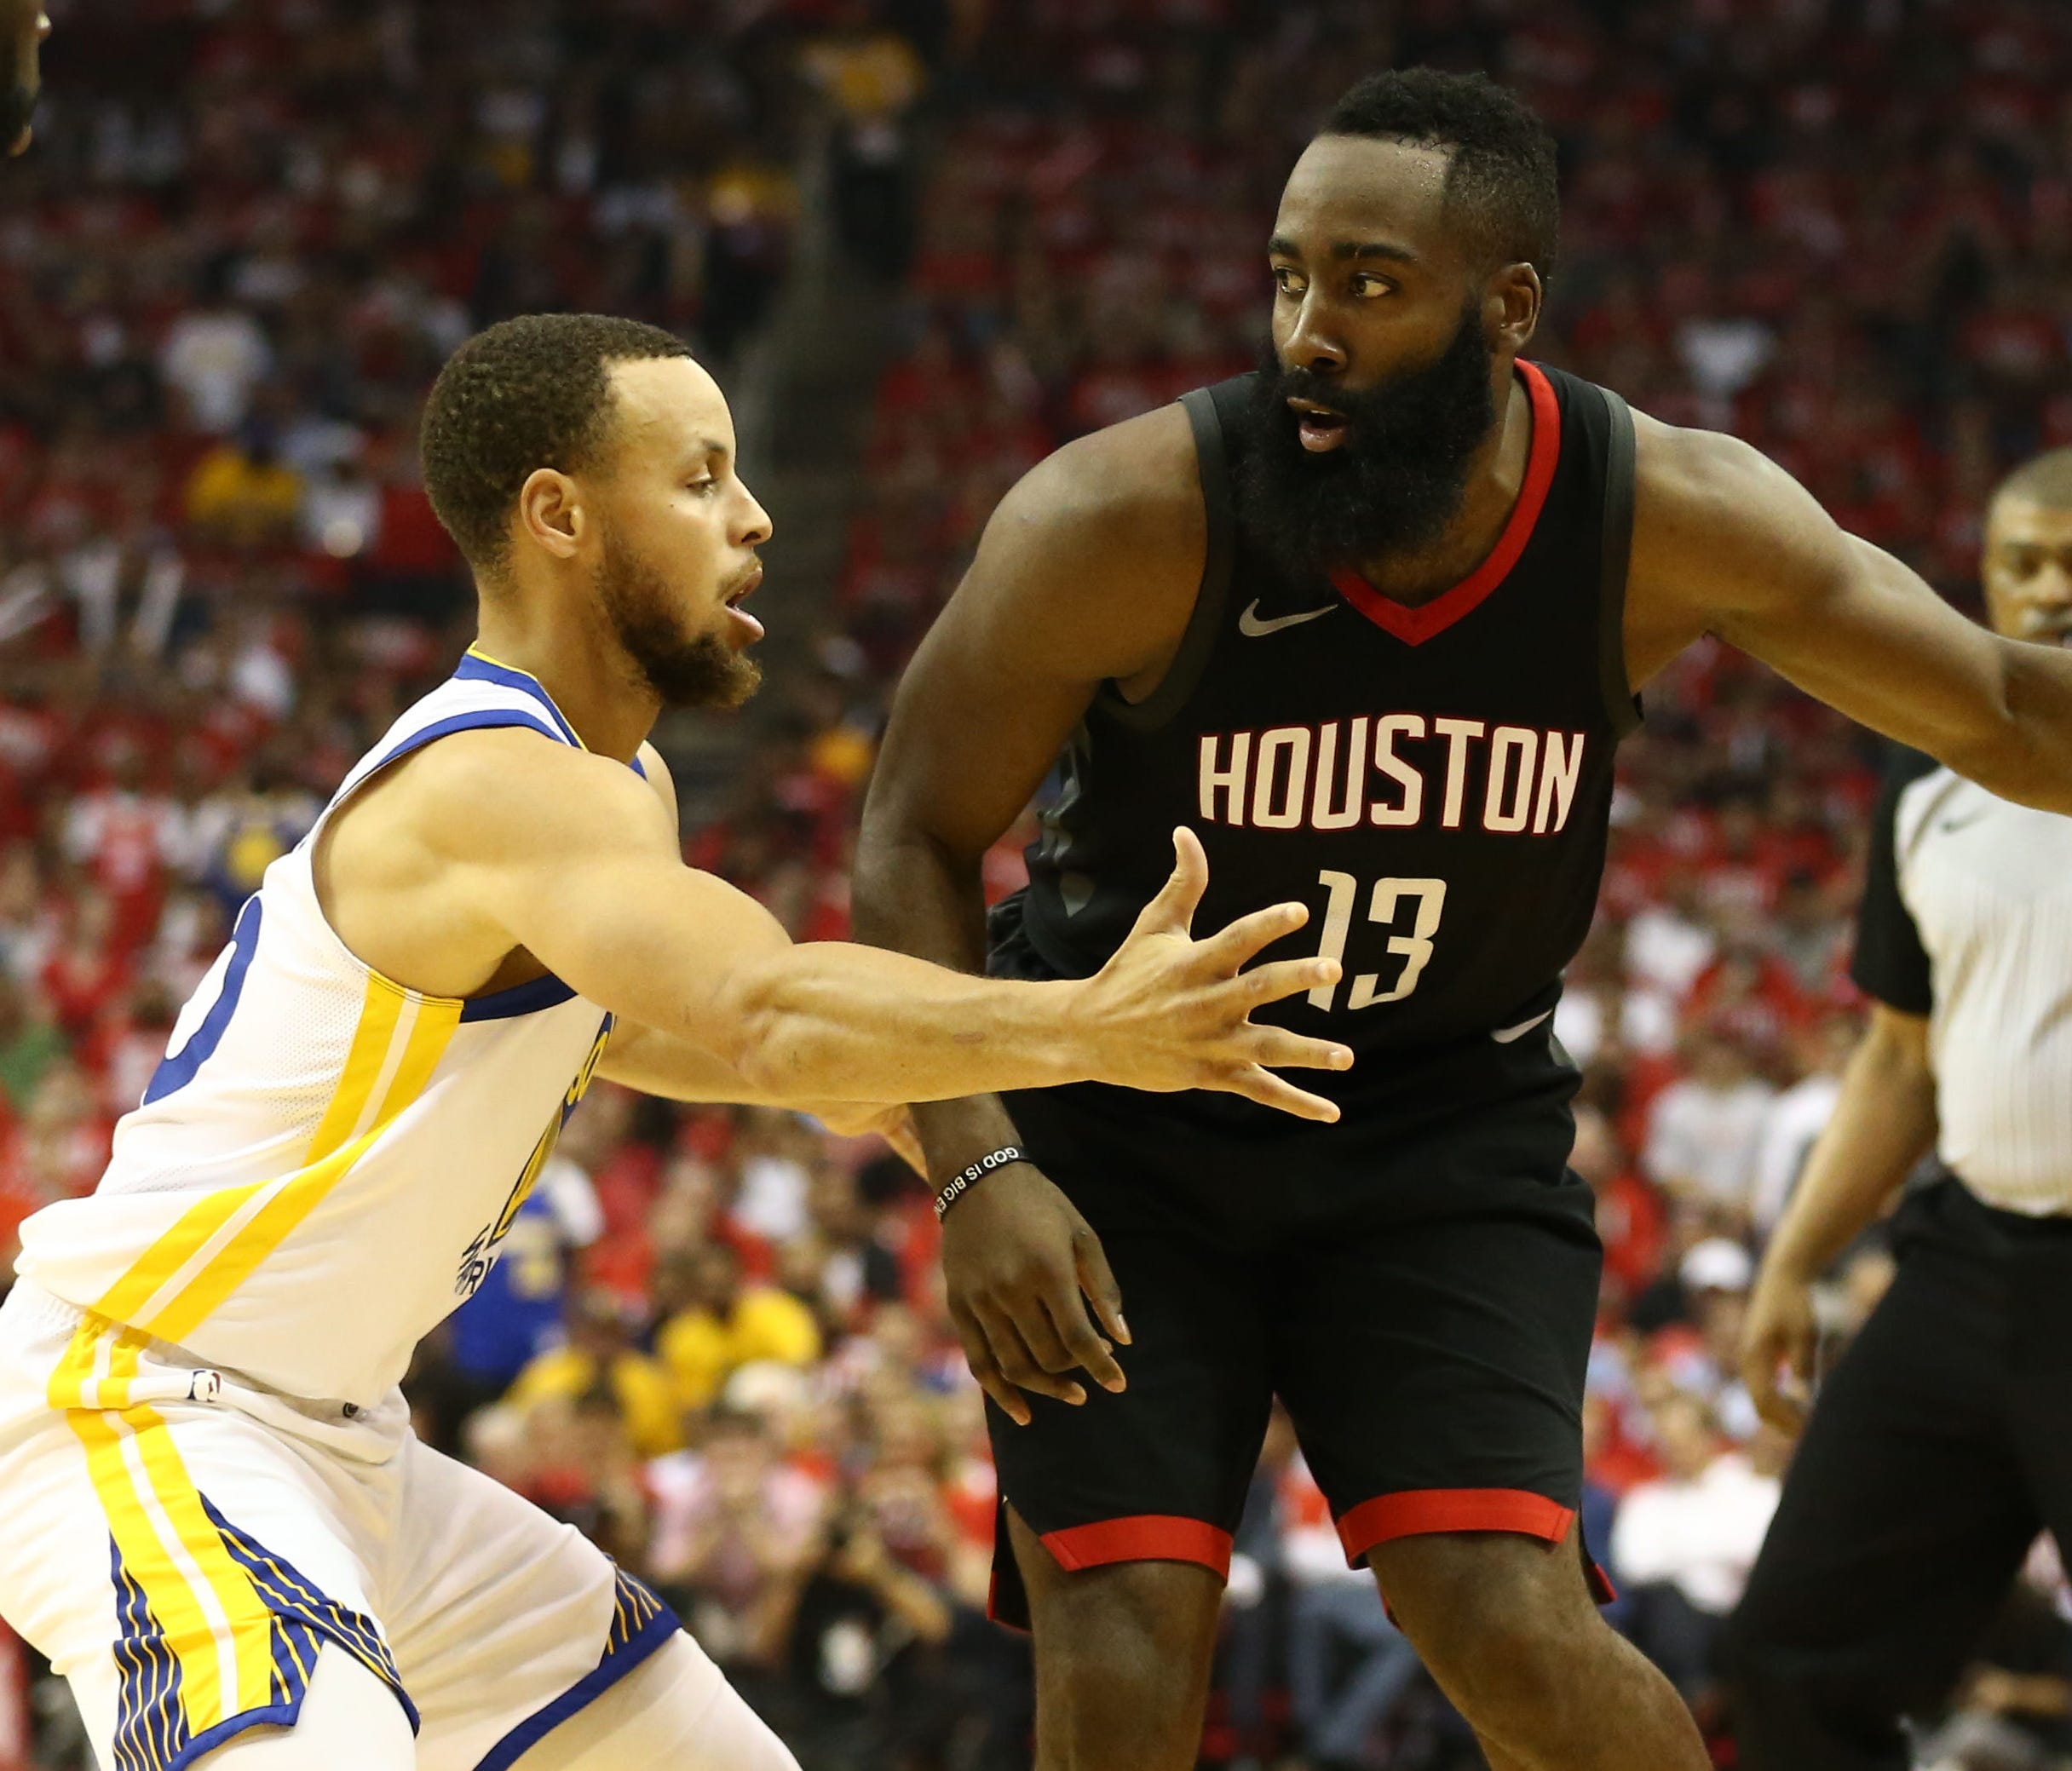 Houston Rockets guard James Harden (13) dribbles against Golden State Warriors guard Stephen Curry (30) during the second quarter in Game 1 of the Western Conference finals.